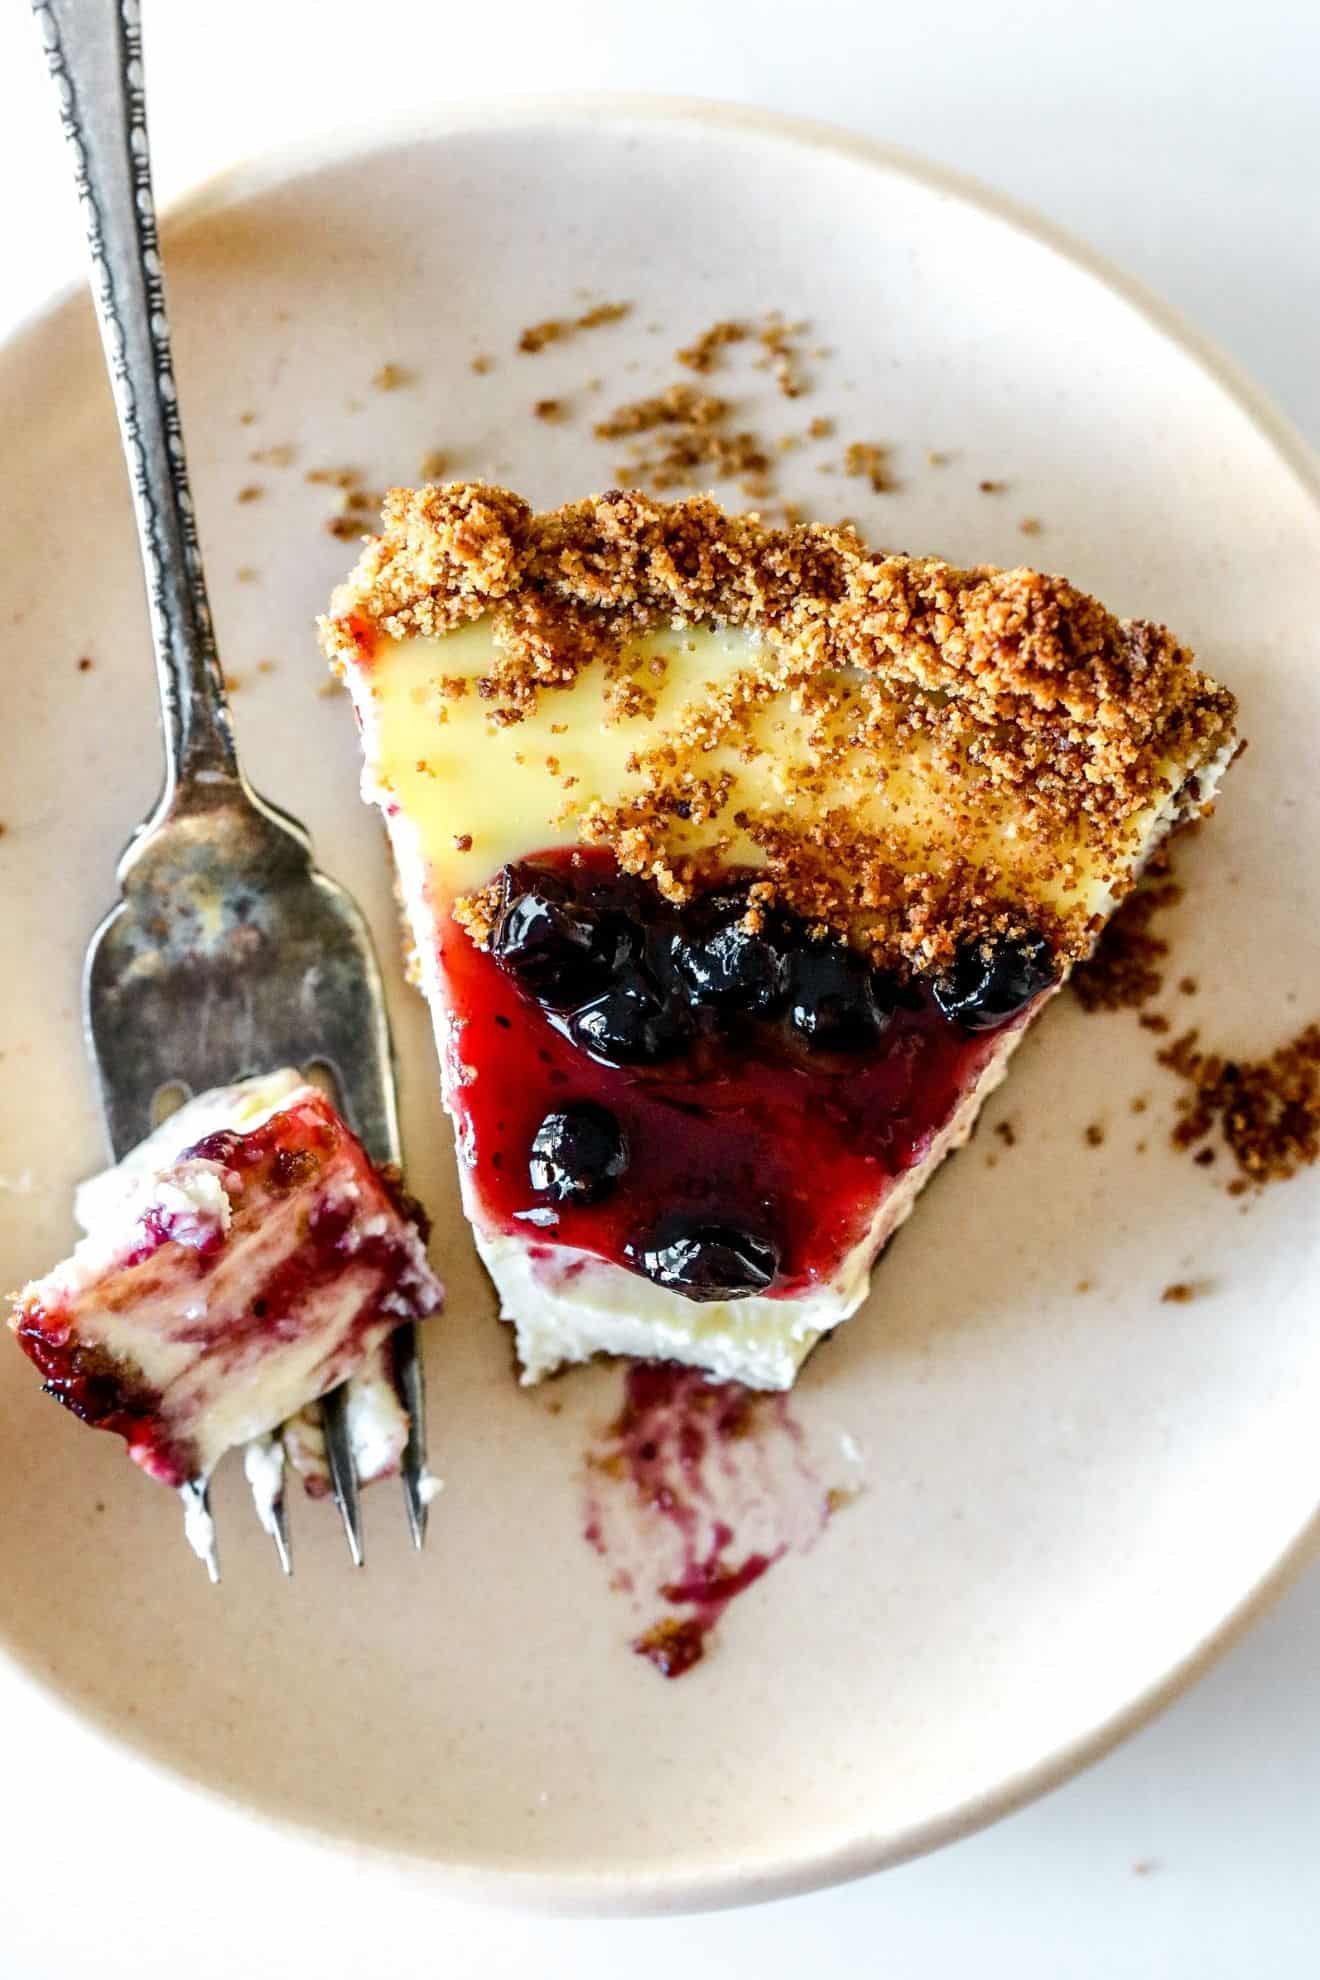 This is an overhead view of a slice of cream cheese pie. The slice is on a small beige plate and is topped with blueberry jam. A fork is taking off a bite of the pie and leaning on the side of the plate. The plate sits on a white counter with a white background.